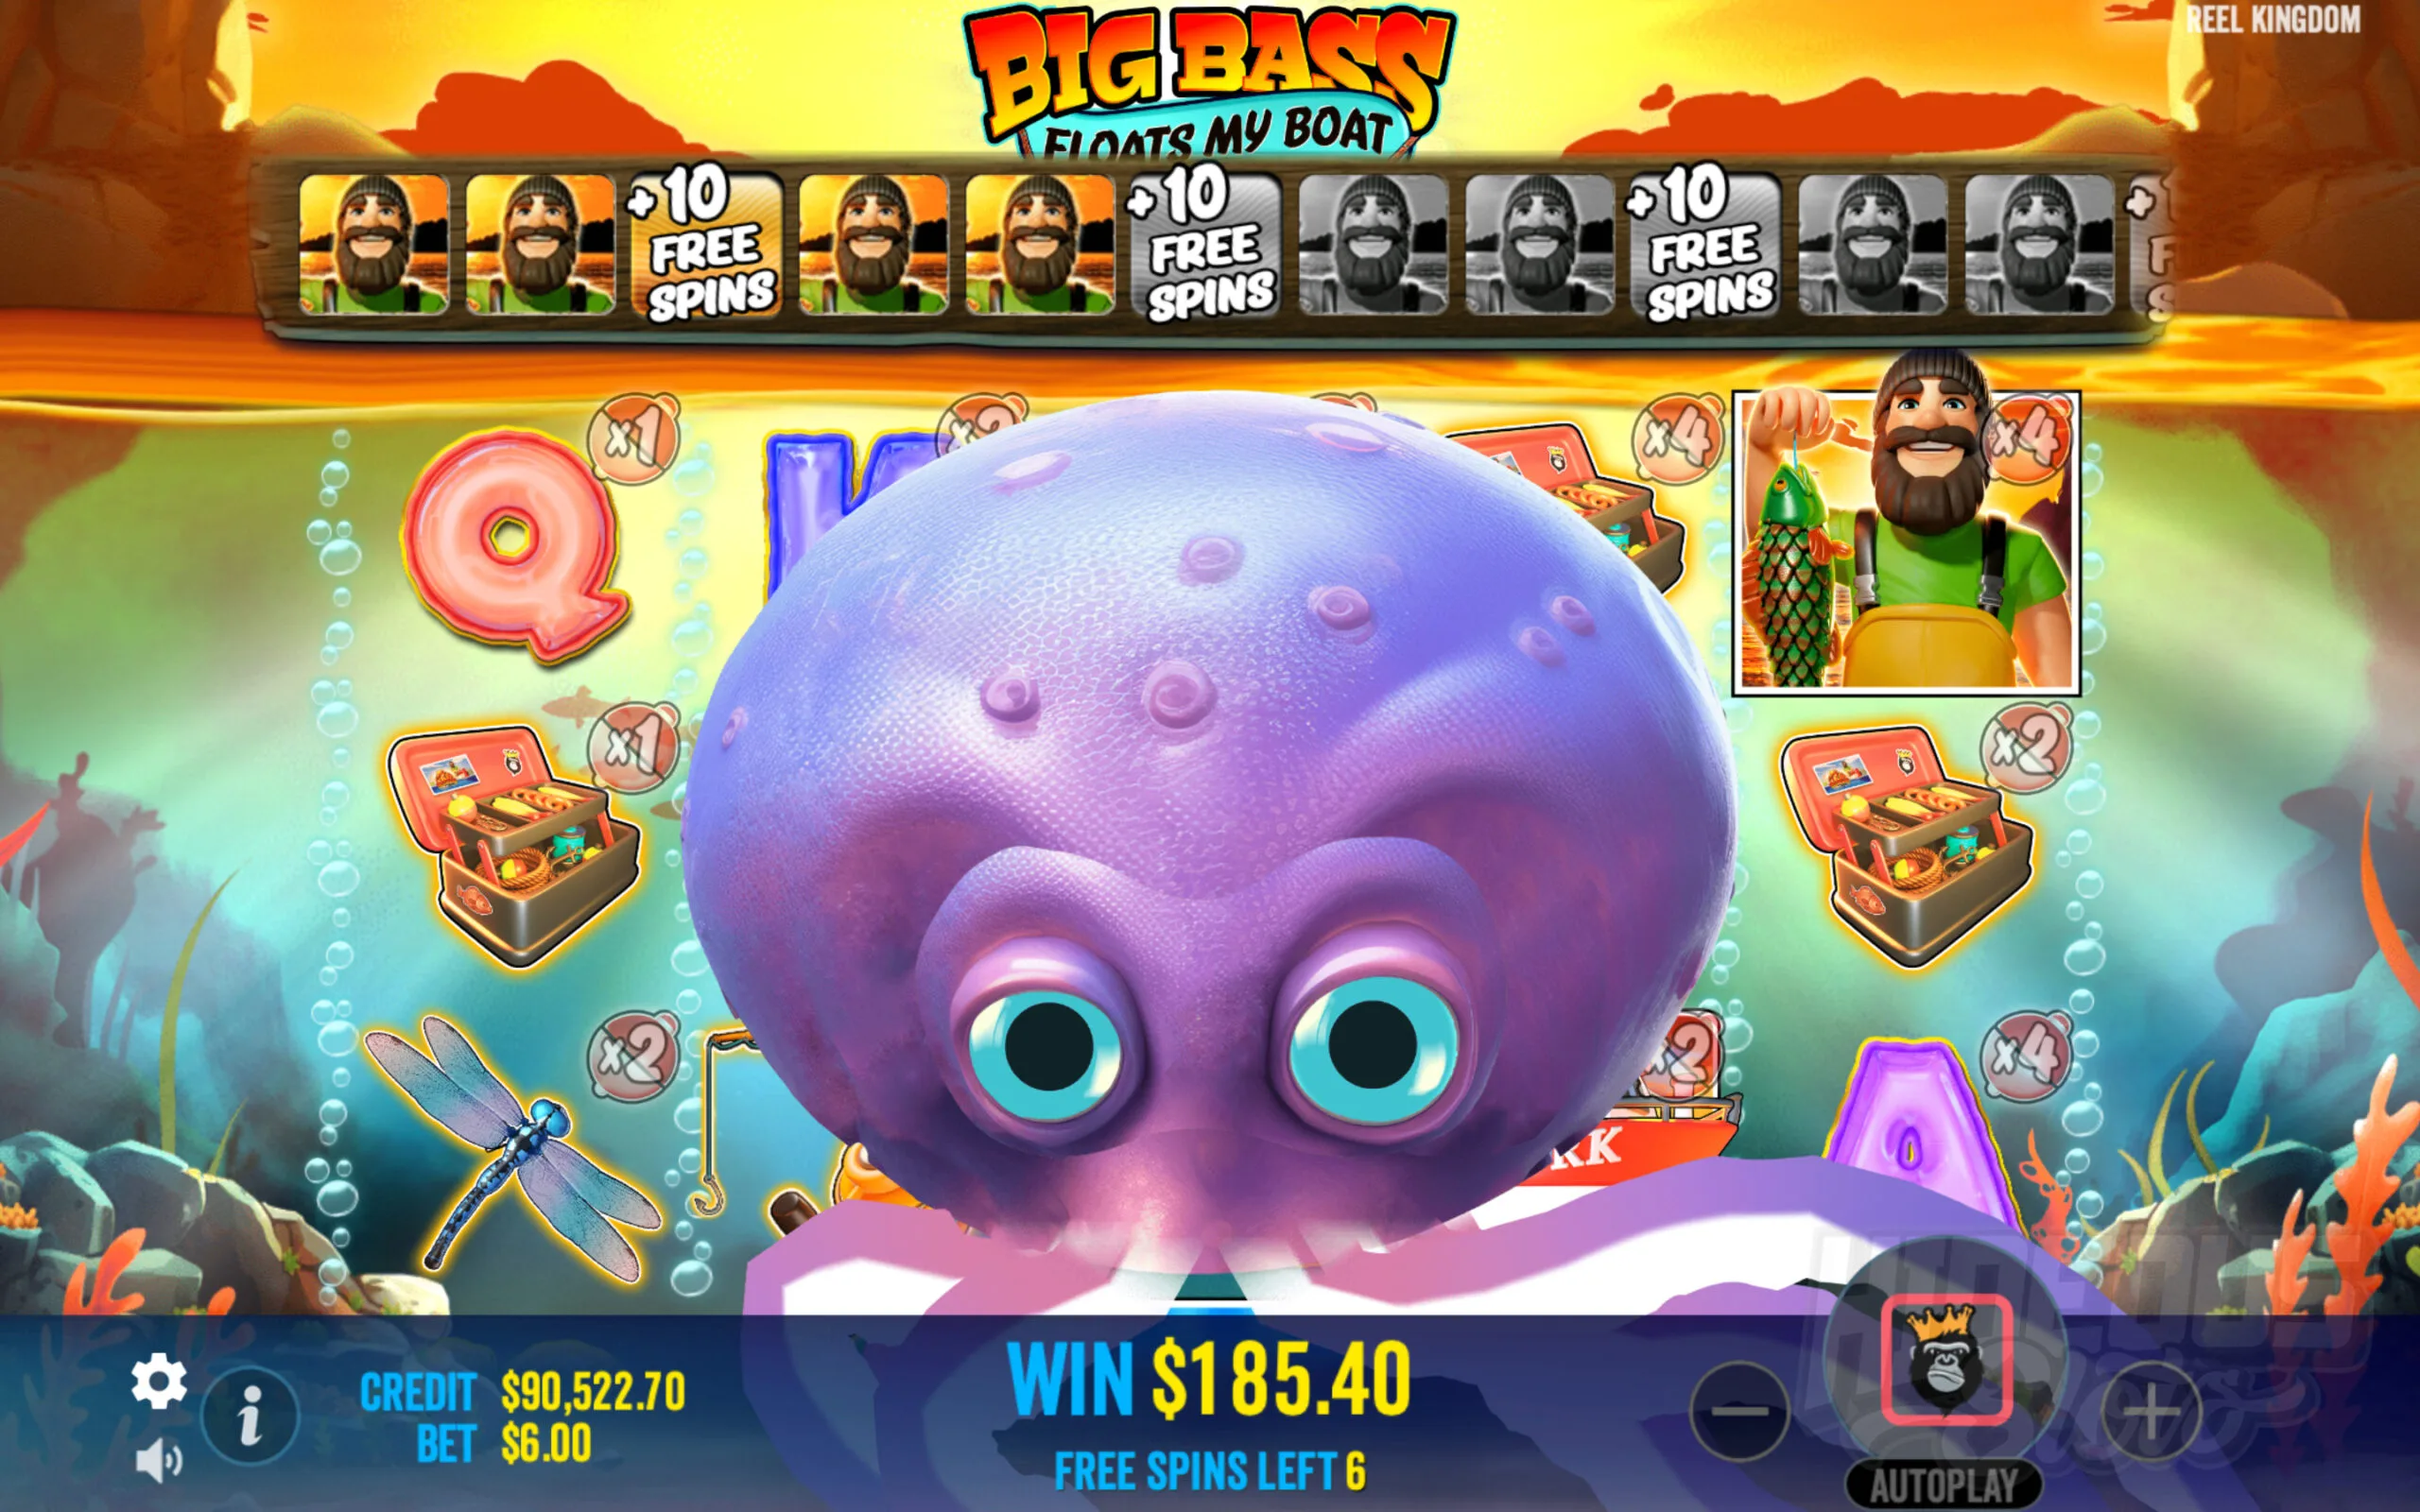 During Free Spins the Octopus Can Appear to Trigger Special Features